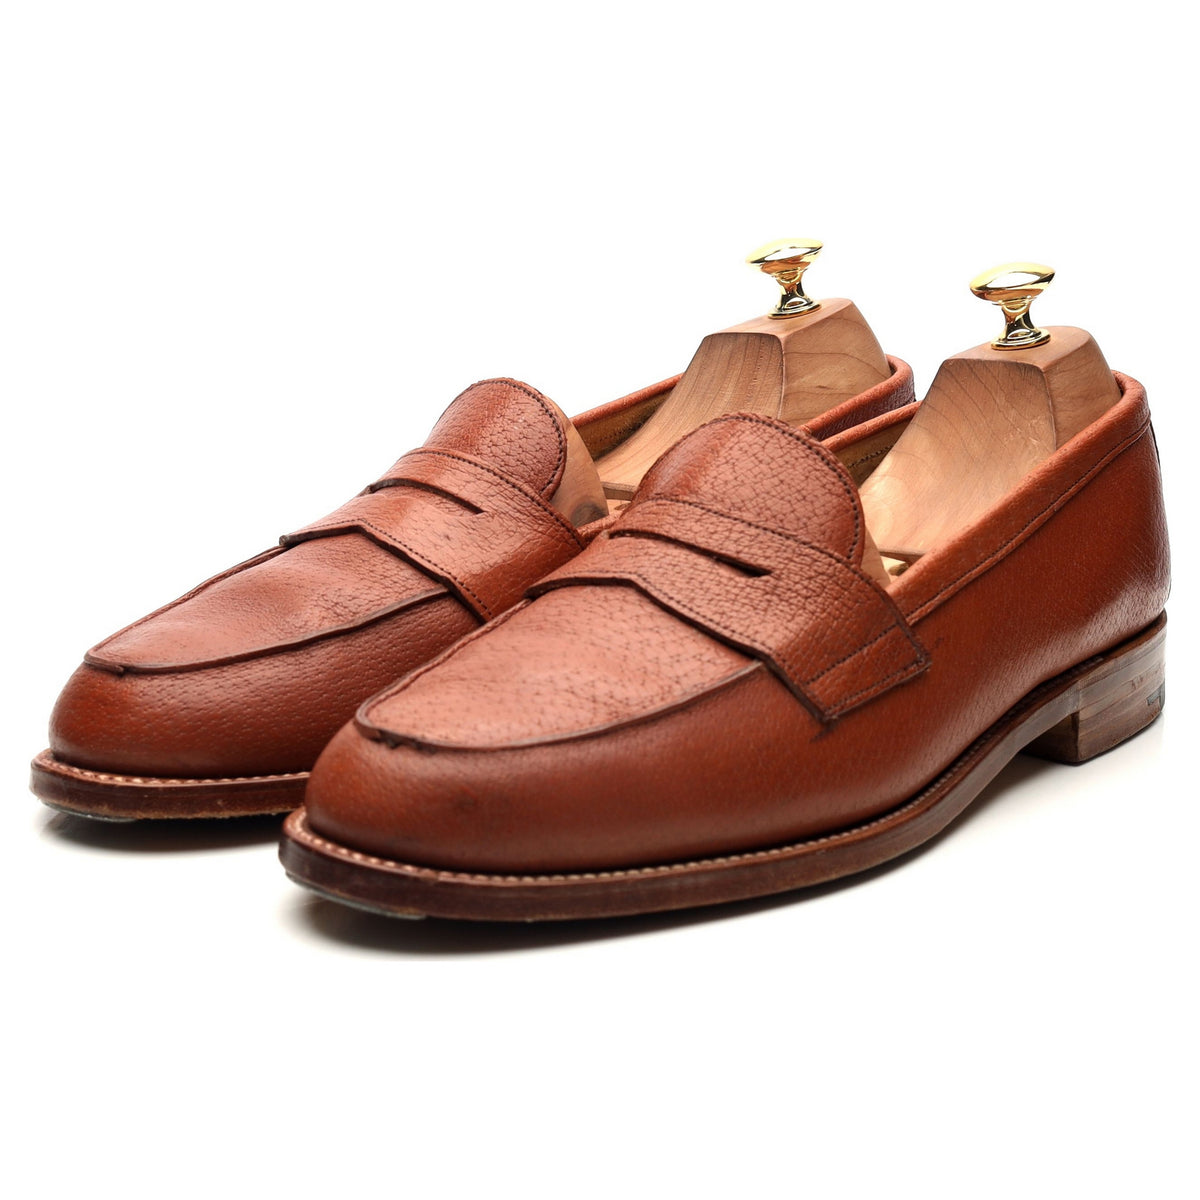 Tan Brown Pigskin Leather Loafers UK 10